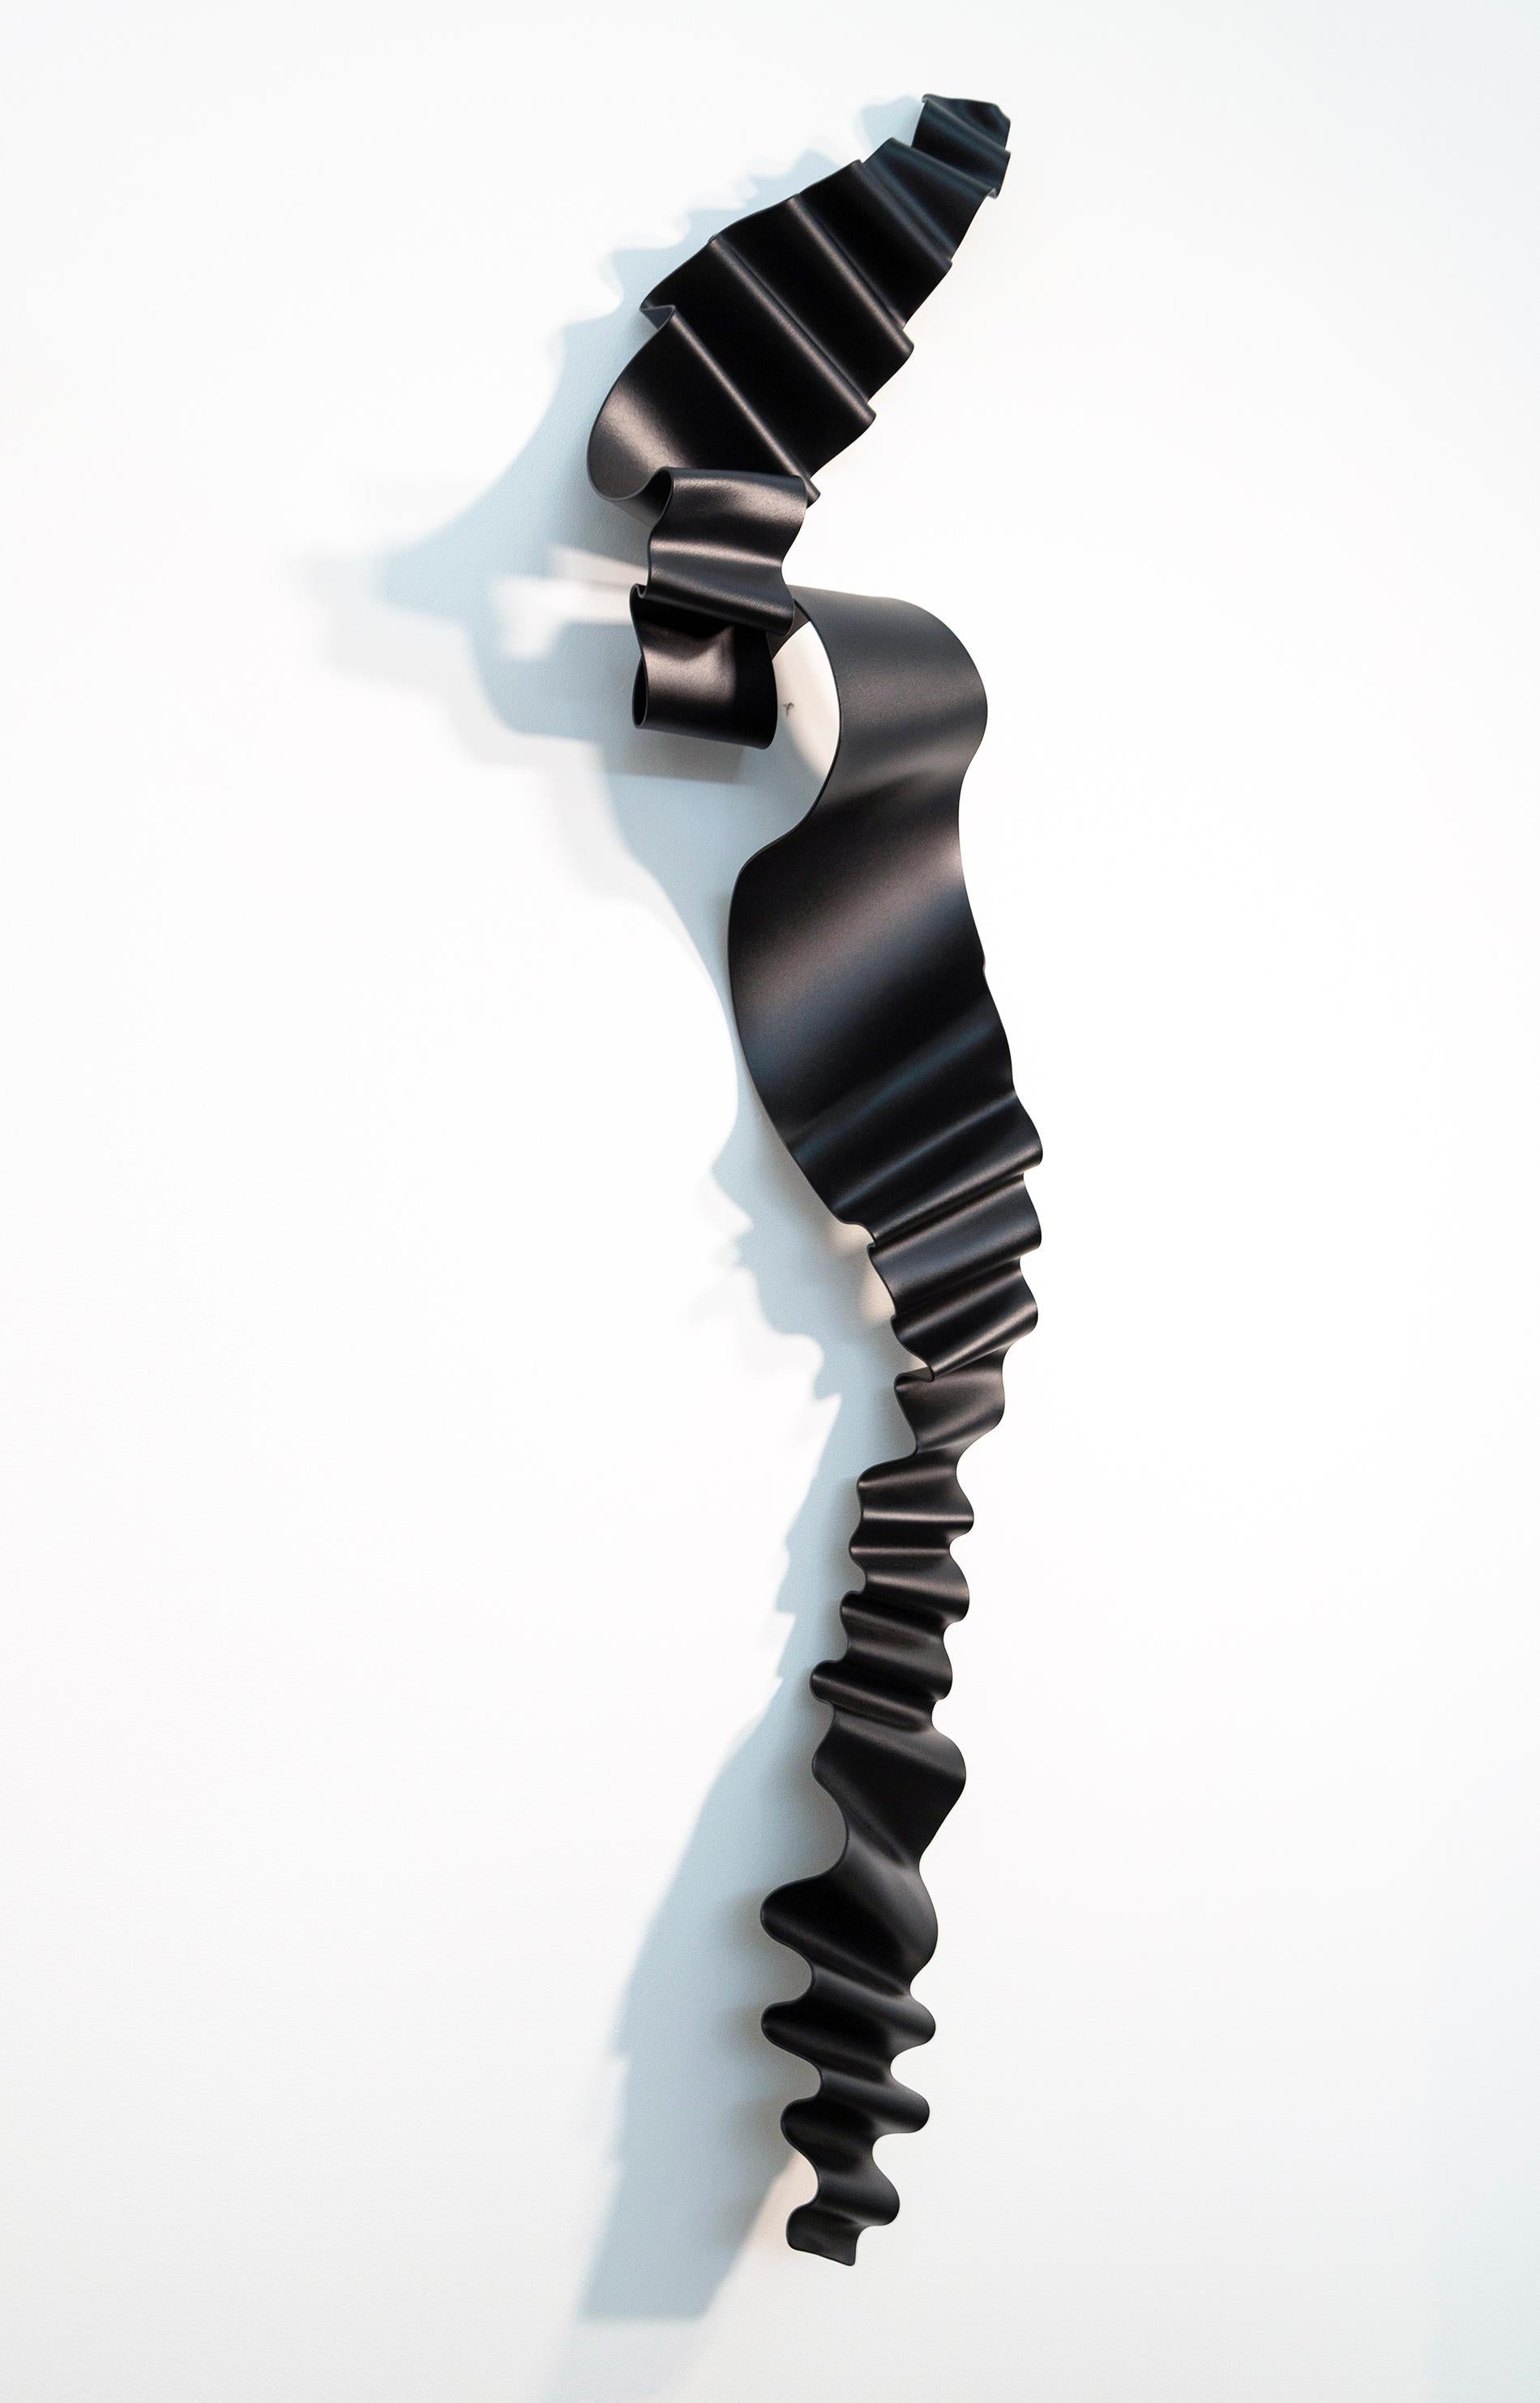 This dramatic wall sculpture as elegant and expressive as a cursive signature was created by Stefan Duerst. The German born artist’s ethereal work hand forges steel into dynamic compositions. This piece…a single ribbon of steel is powder coated in a